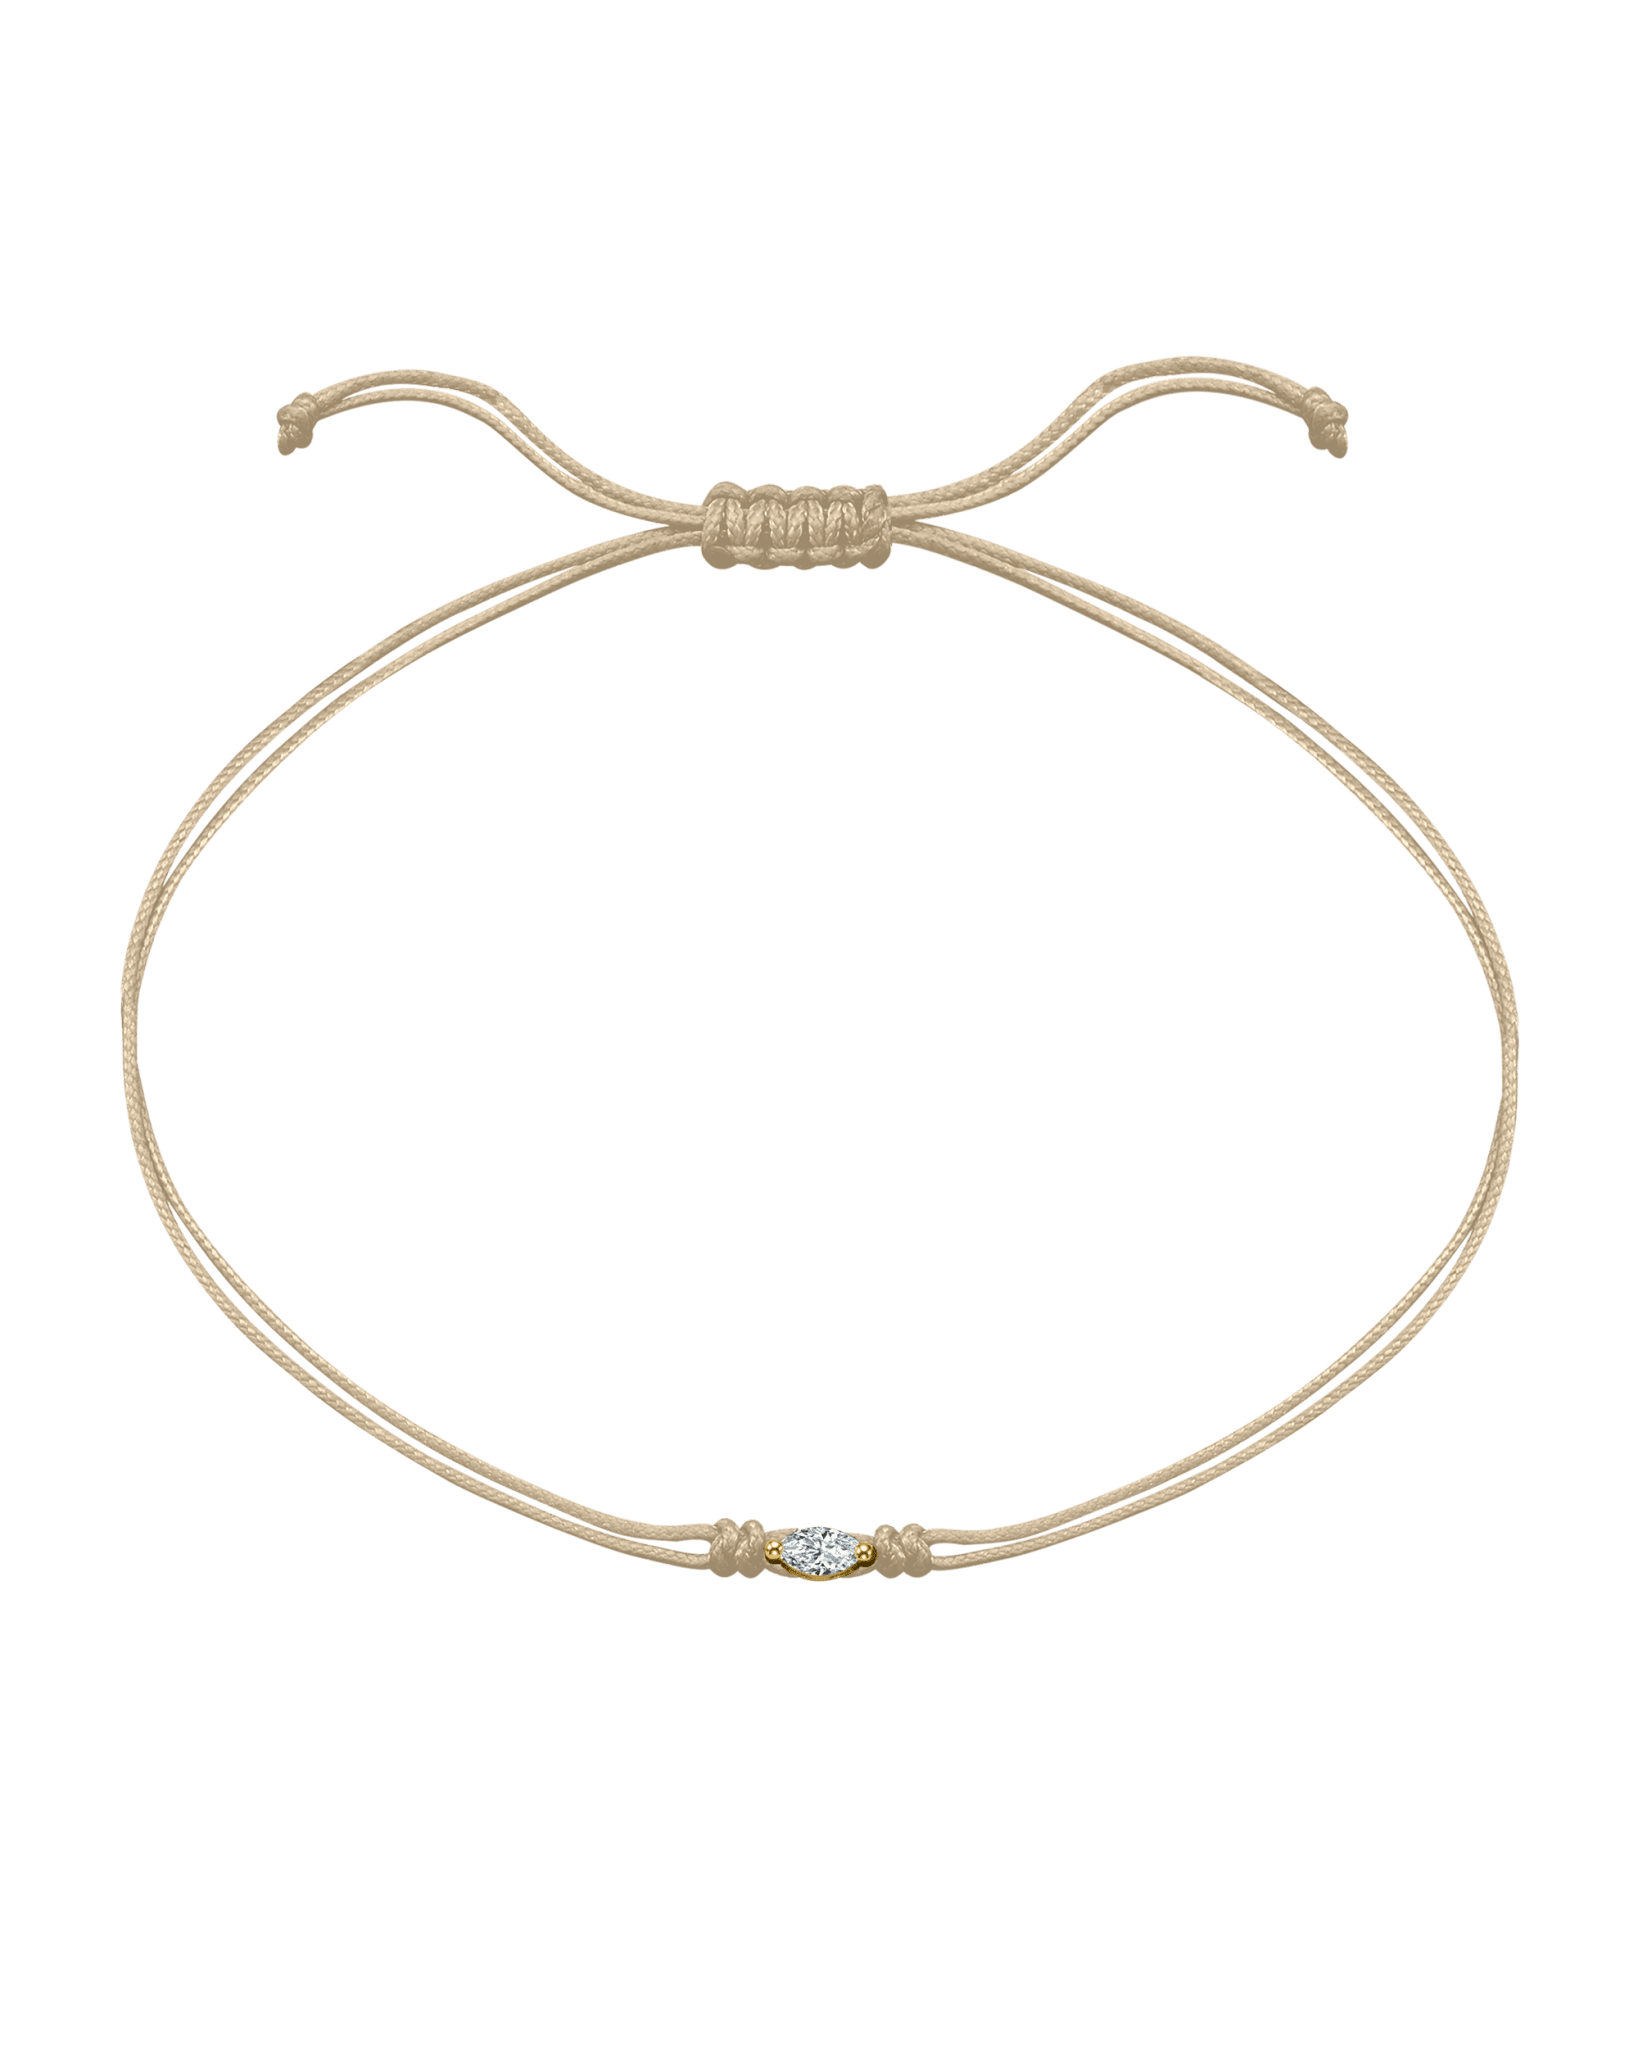 Marquise Diamond String Of Love - 14K Yellow Gold Bracelets 14K Solid Gold Beige 